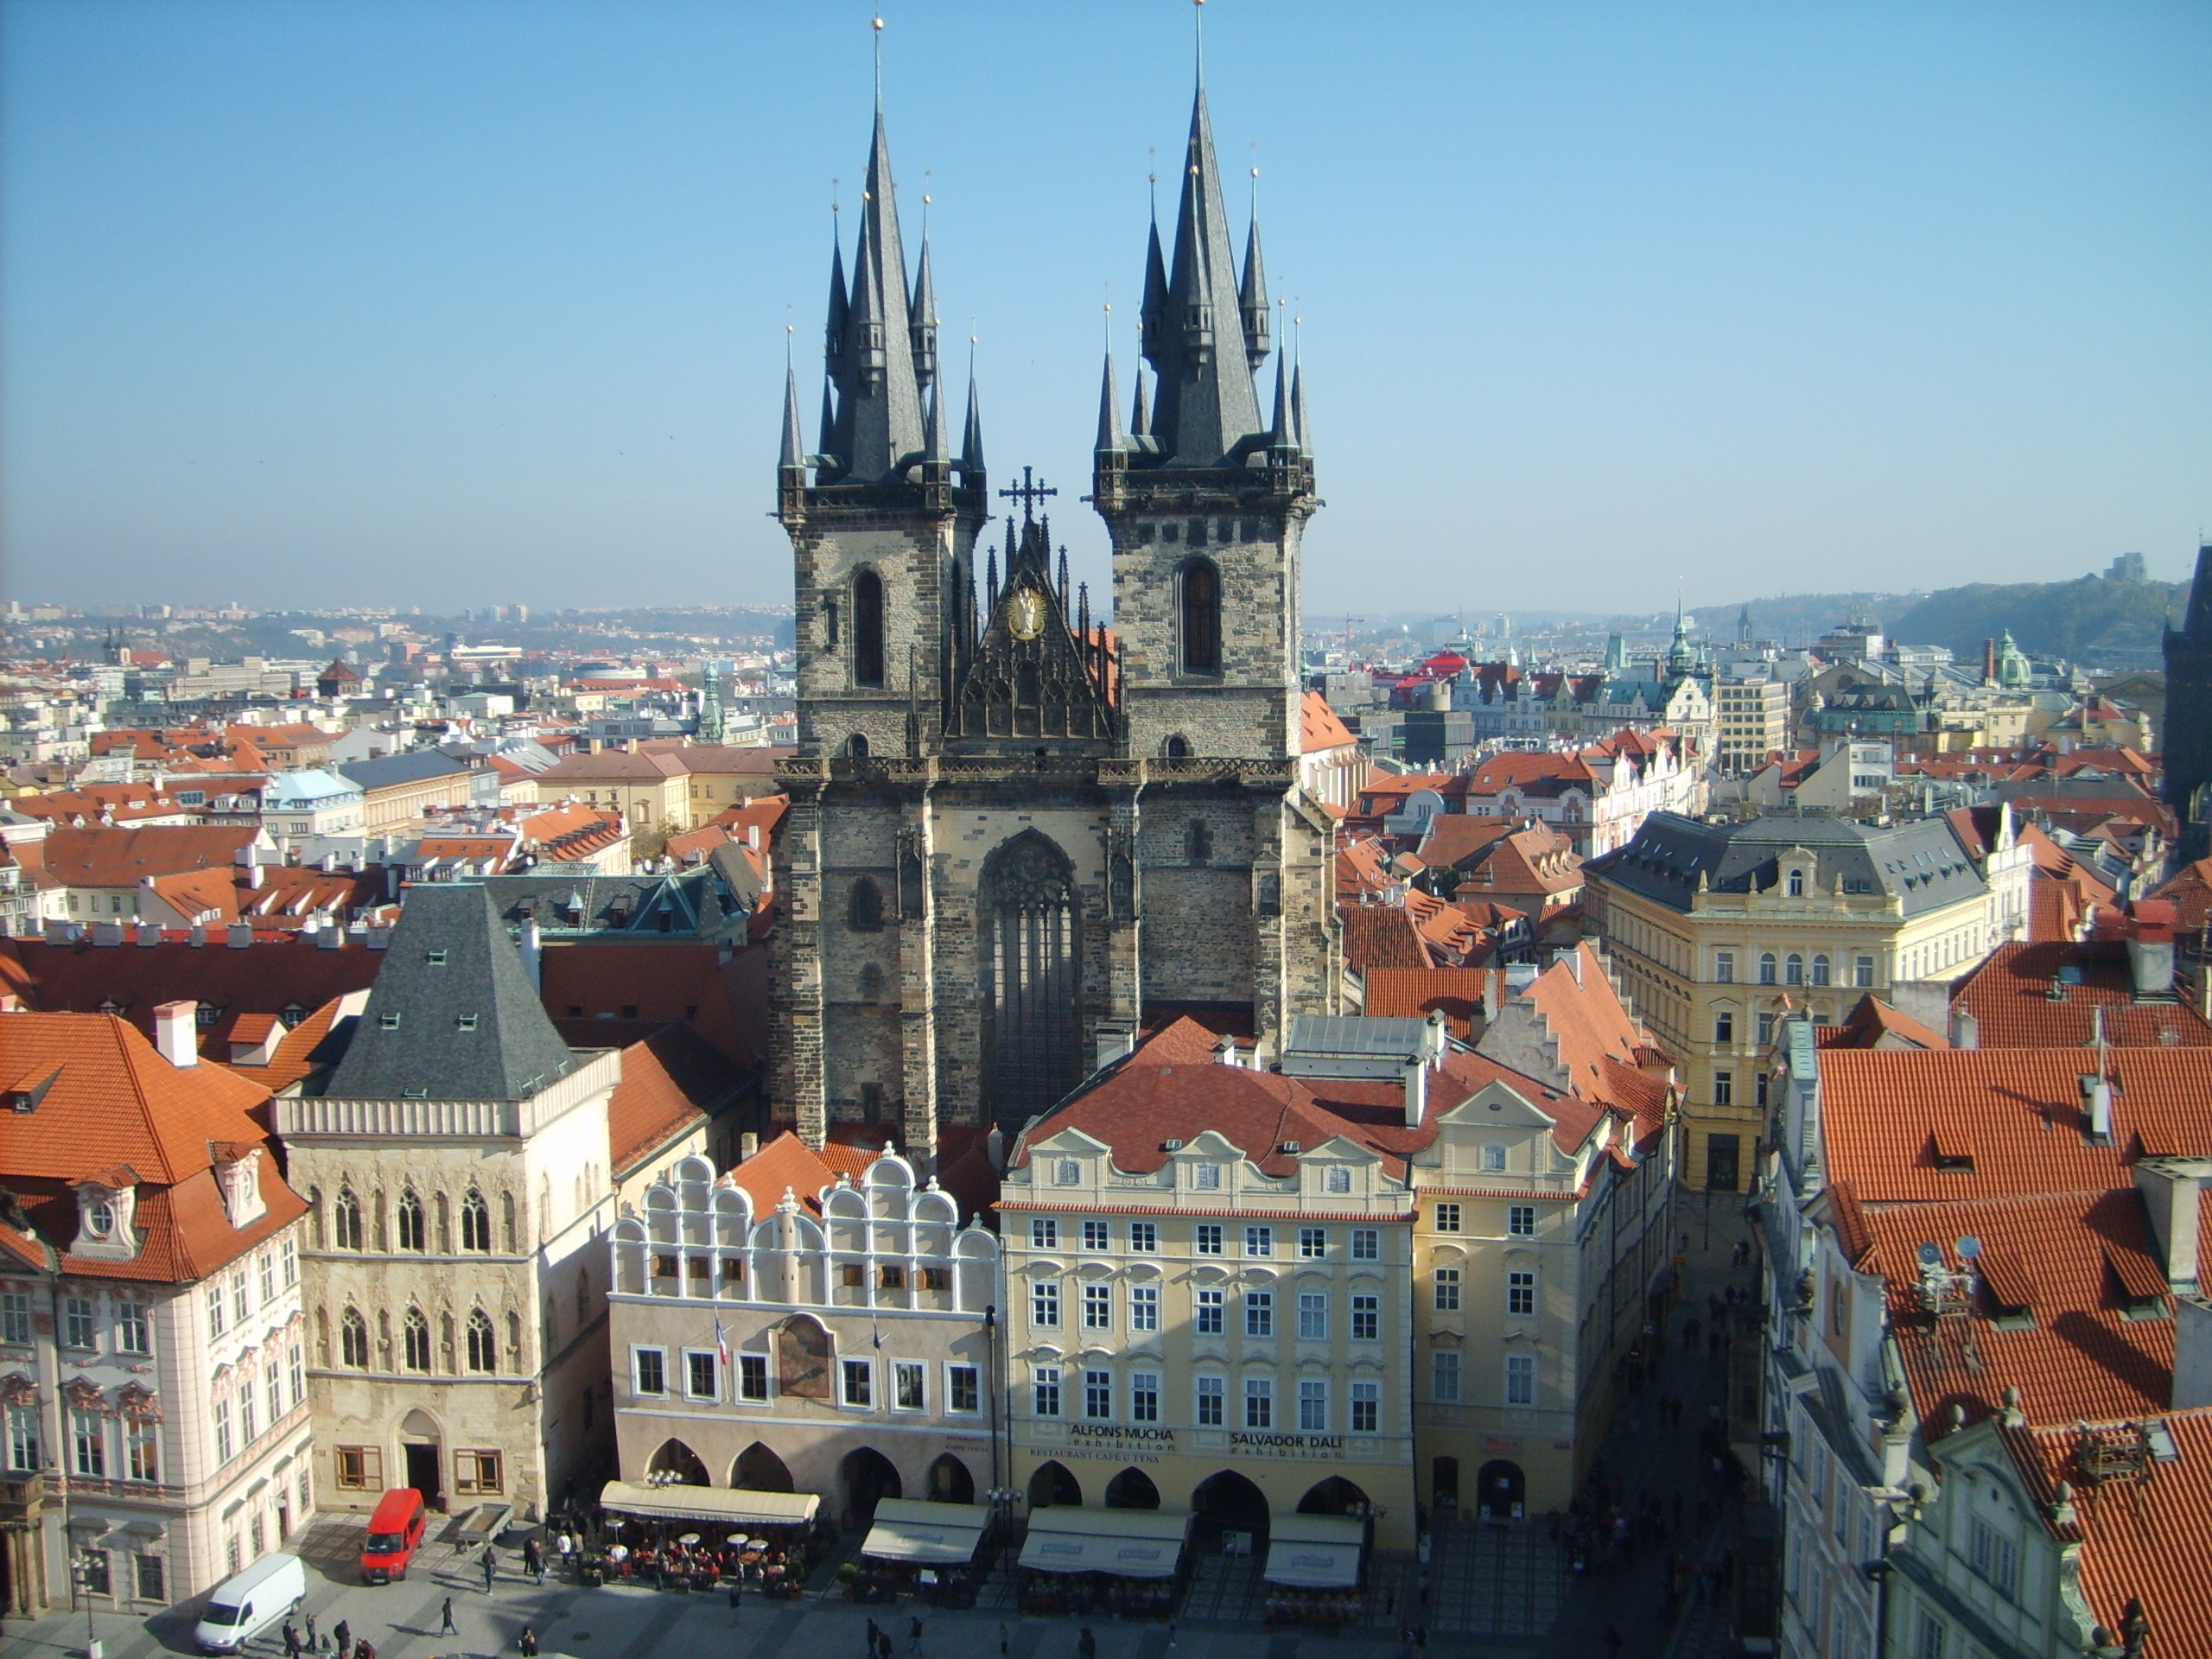 Czechia (Czech Republic): The Church of Mother of God before Tyn, a Gothic church and a dominant feature of the Old Town of Prague. 2560x1920 HD Wallpaper.